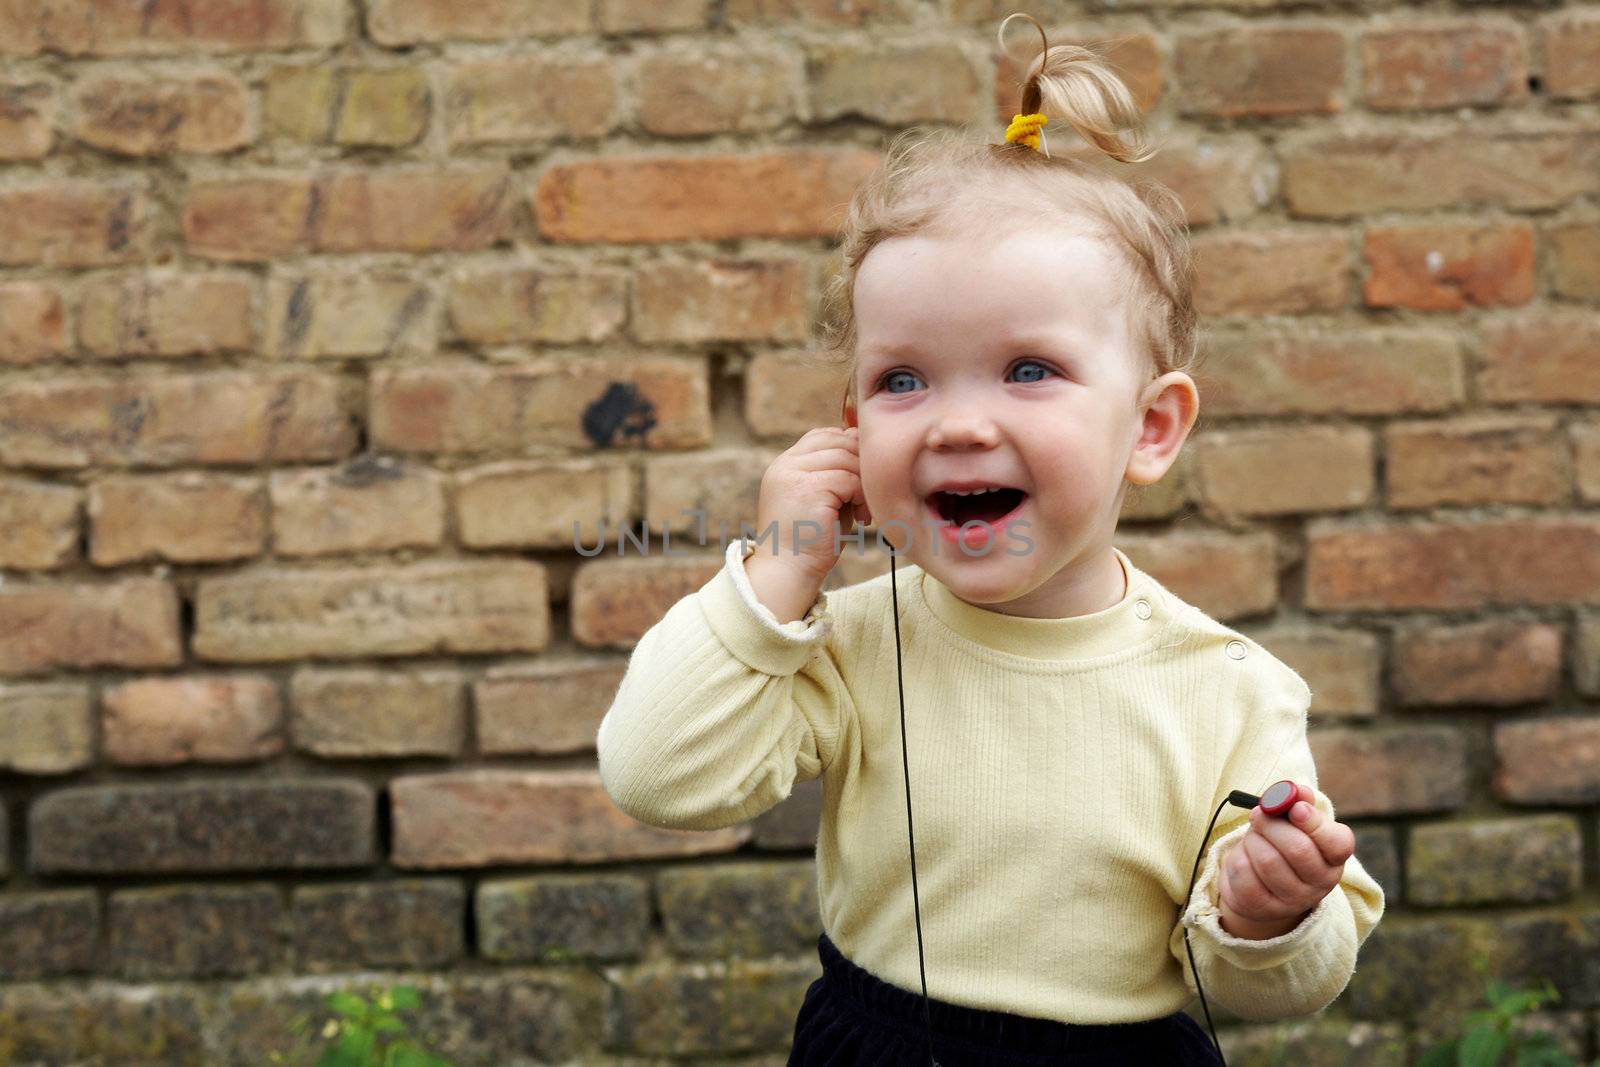 The baby-girl listens to music on a background of a brick wall